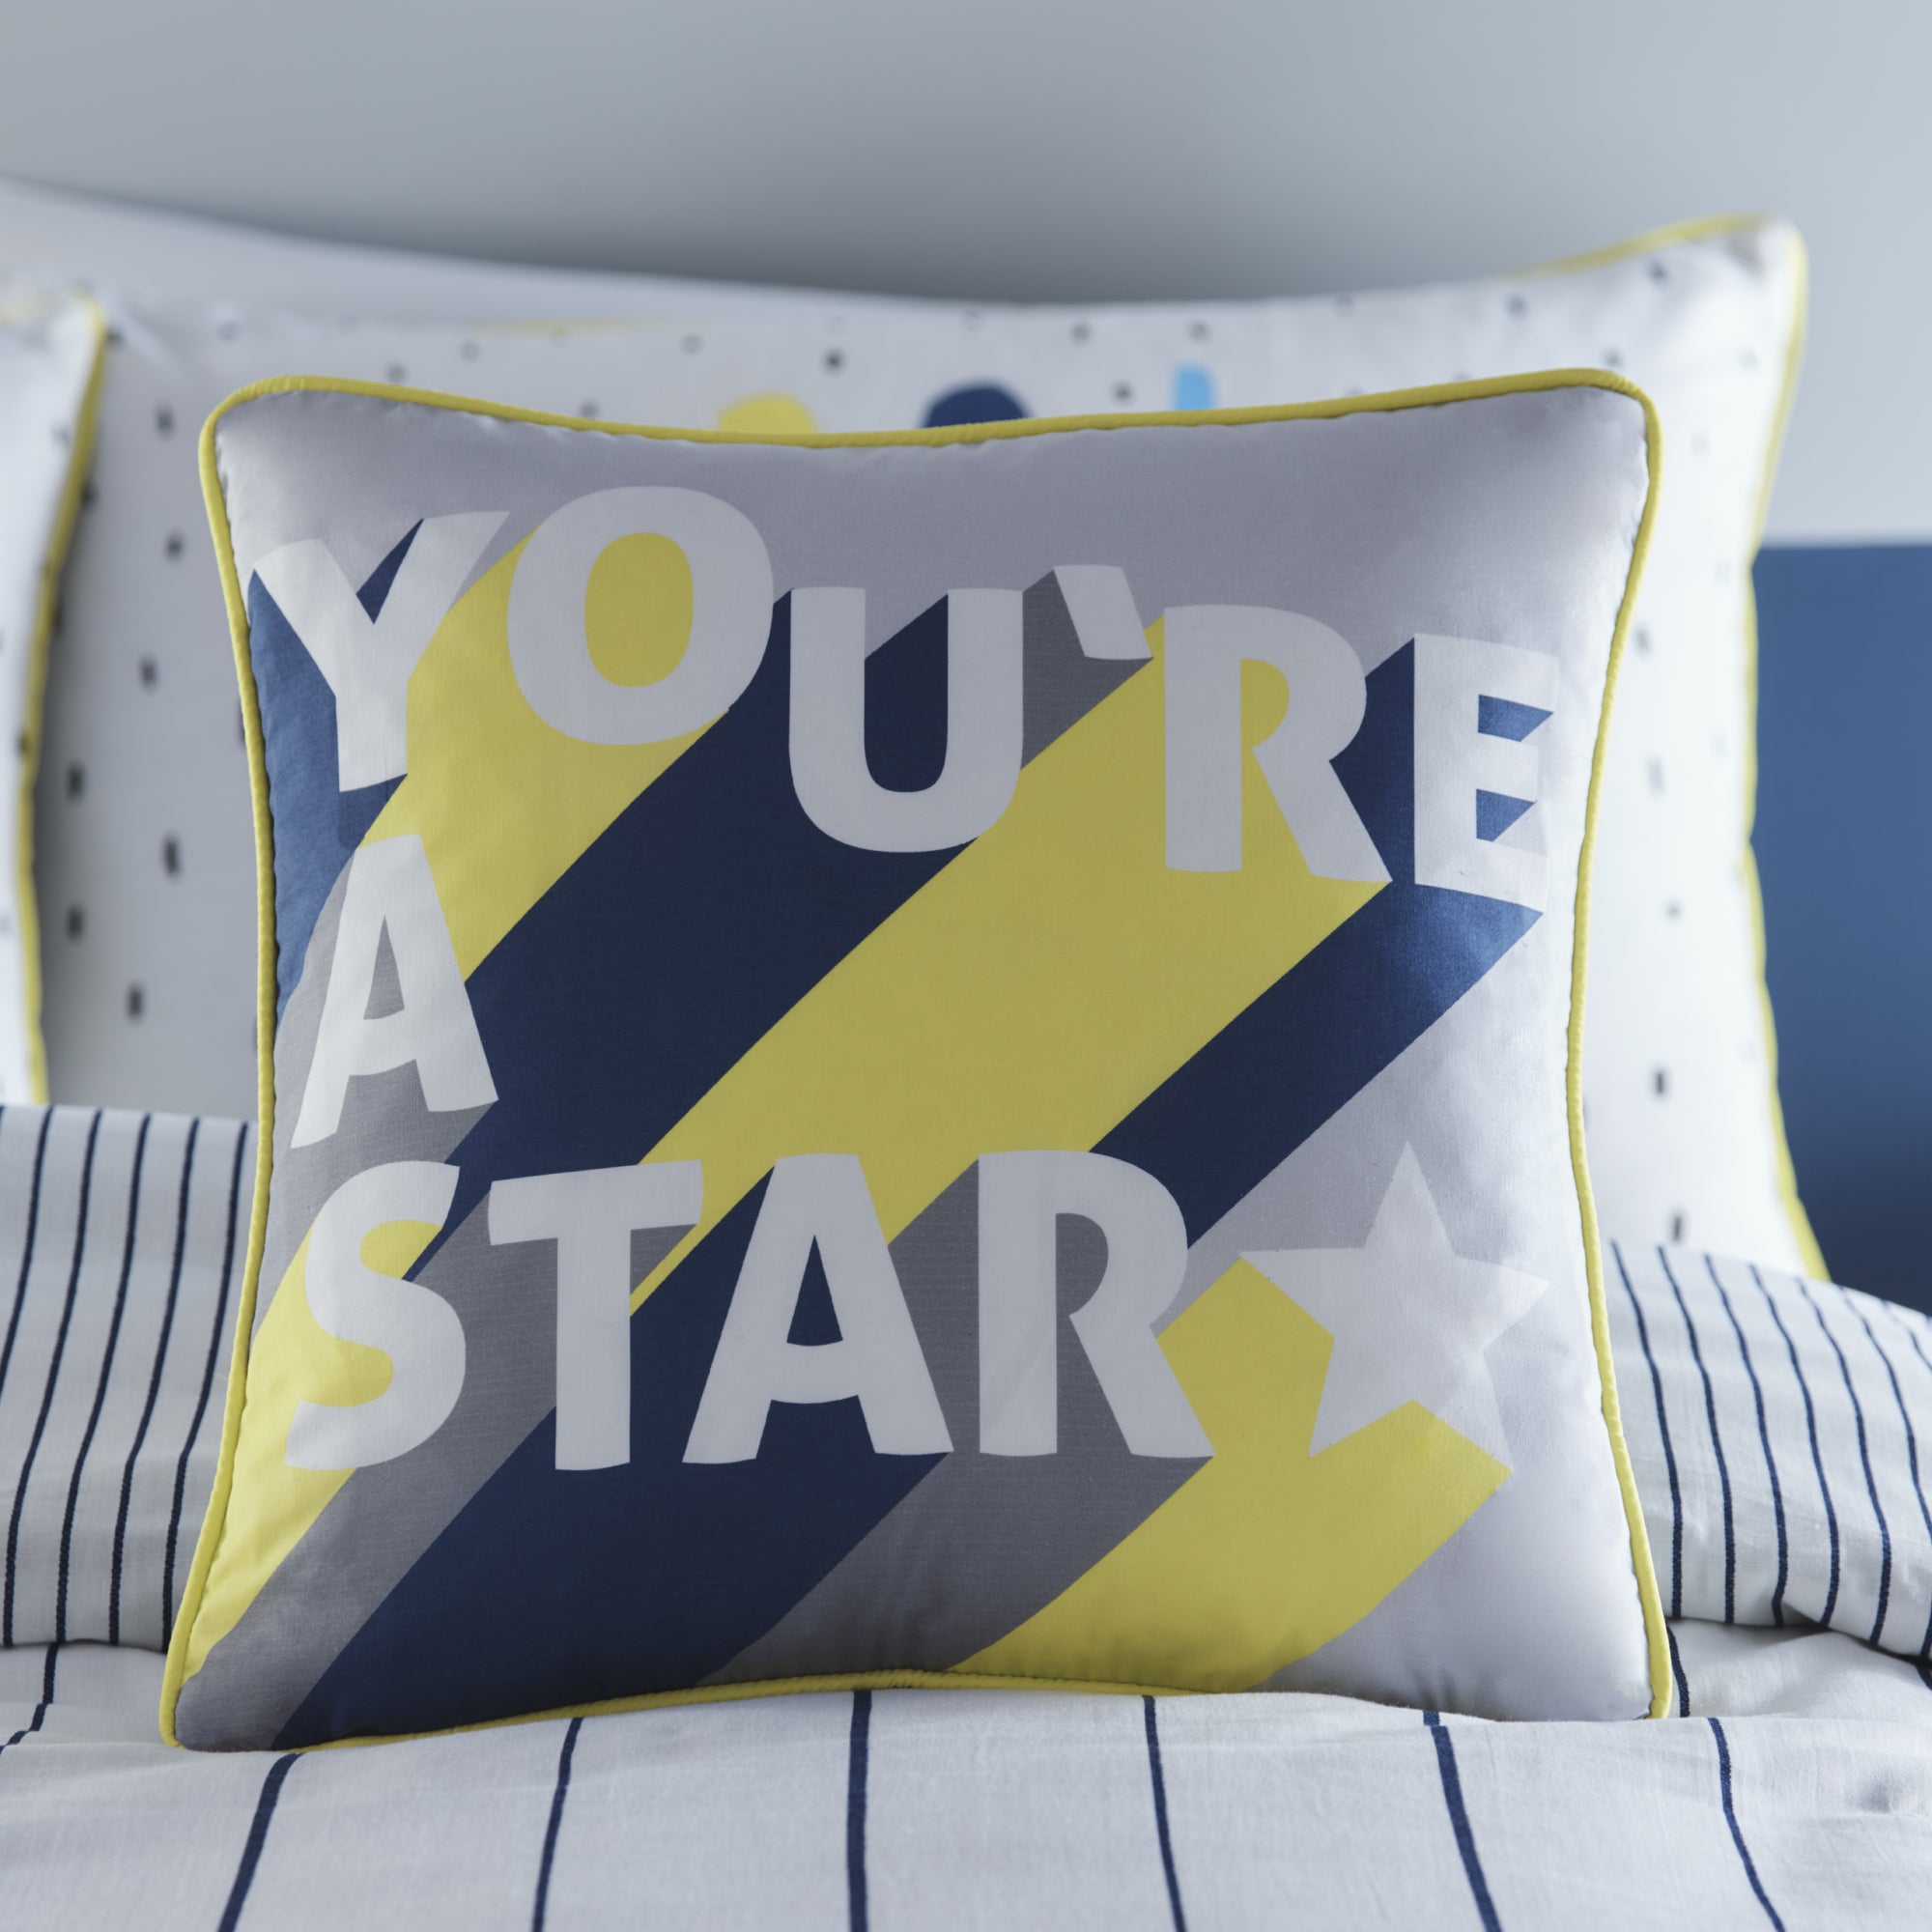 Filled Cushion You're a Star by Appletree Kids in Navy